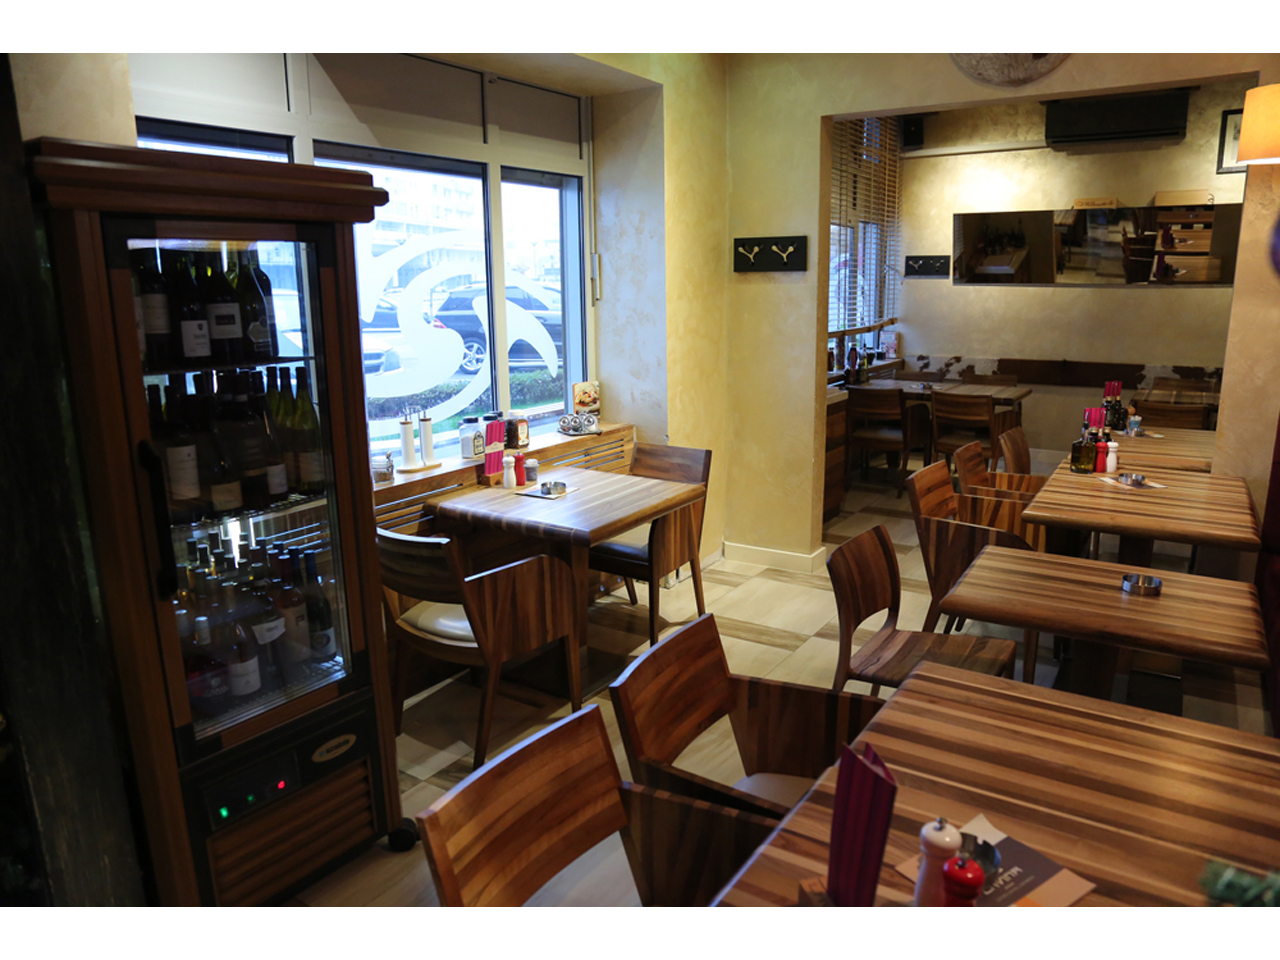 CAFFE&CUCINA LAVINA Spaces for celebrations, parties, birthdays Beograd